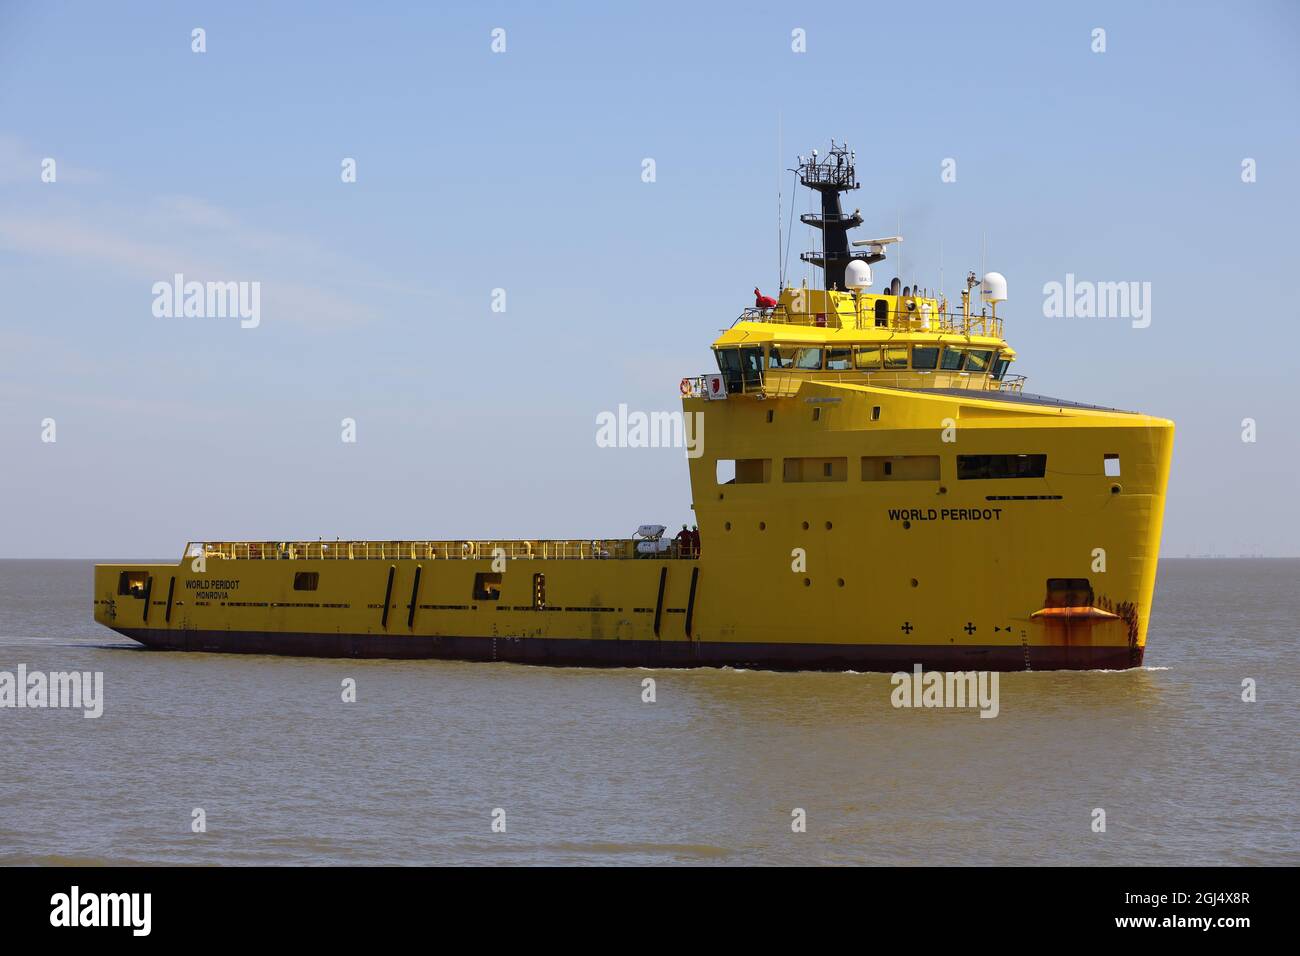 The offshore supplier World Peridot will reach the port of Cuxhaven on June 14, 2021. Stock Photo